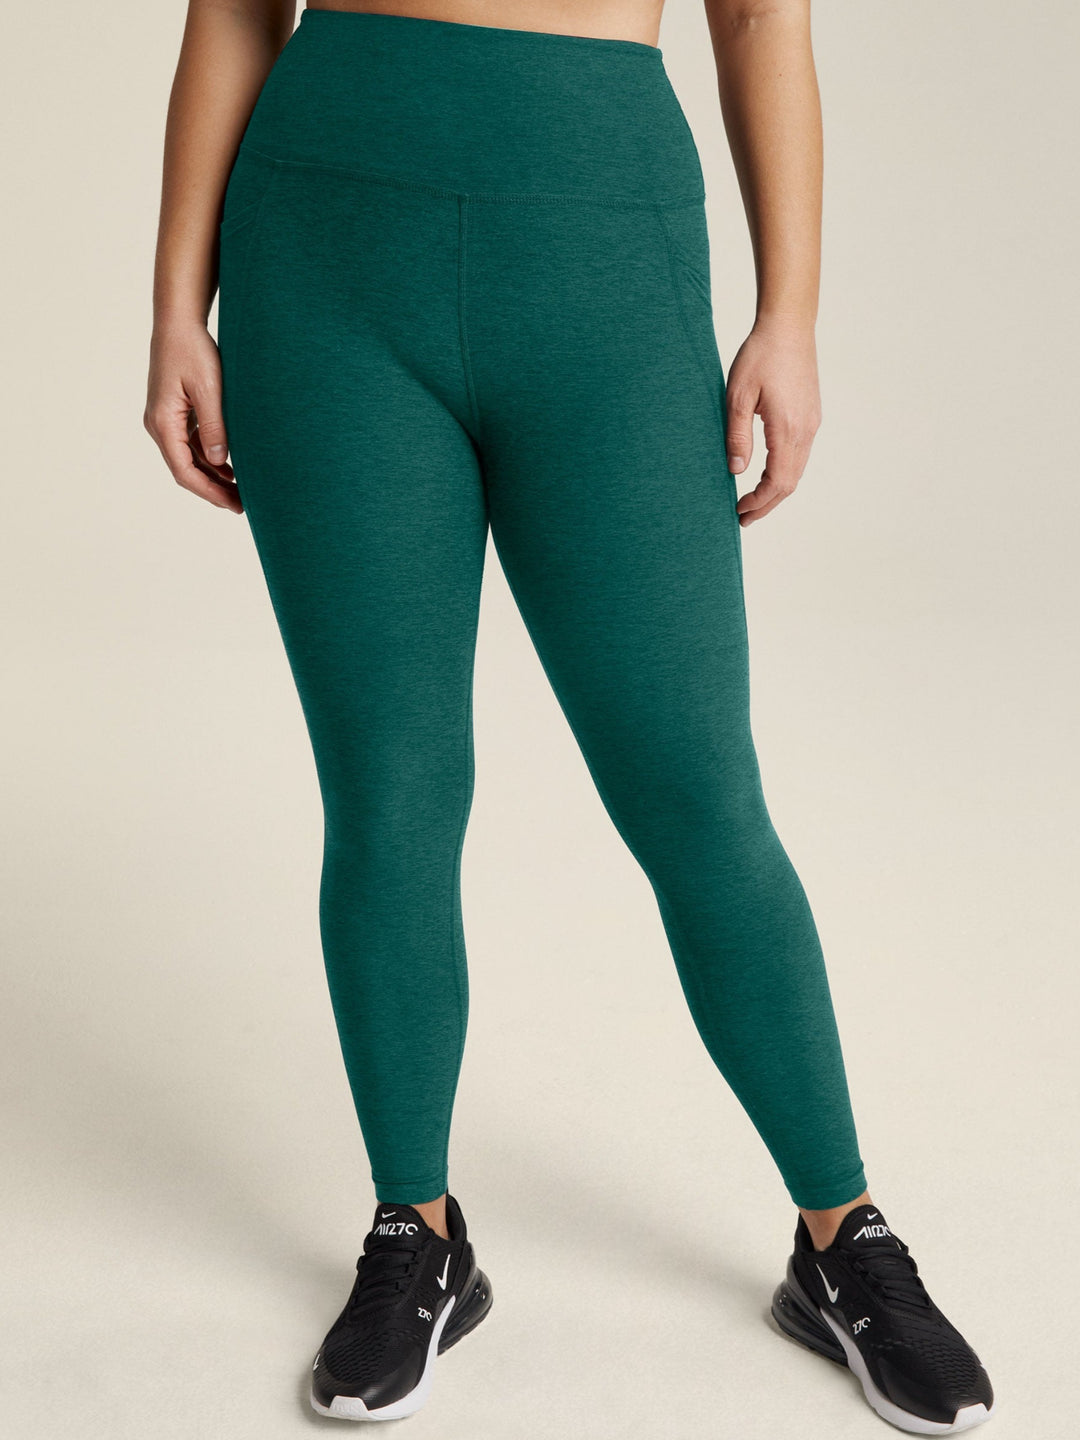 Beyond Yoga Spacedye At Your Lesuire High Waisted Midi Legging